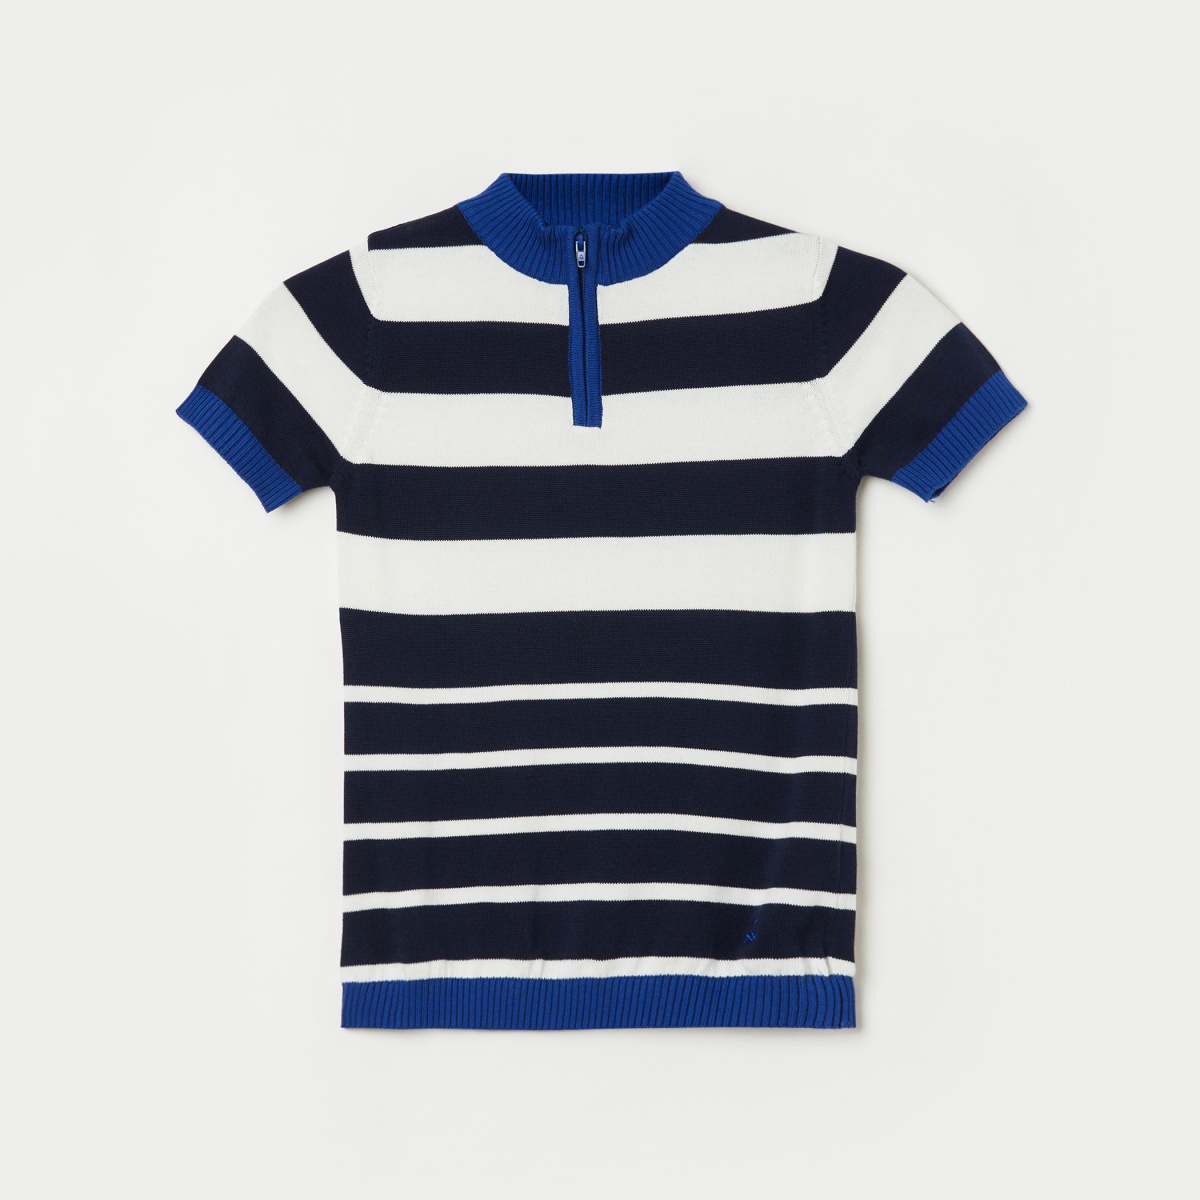 UNITED COLORS OF BENETTON Boys Striped Short Sleeves Sweater